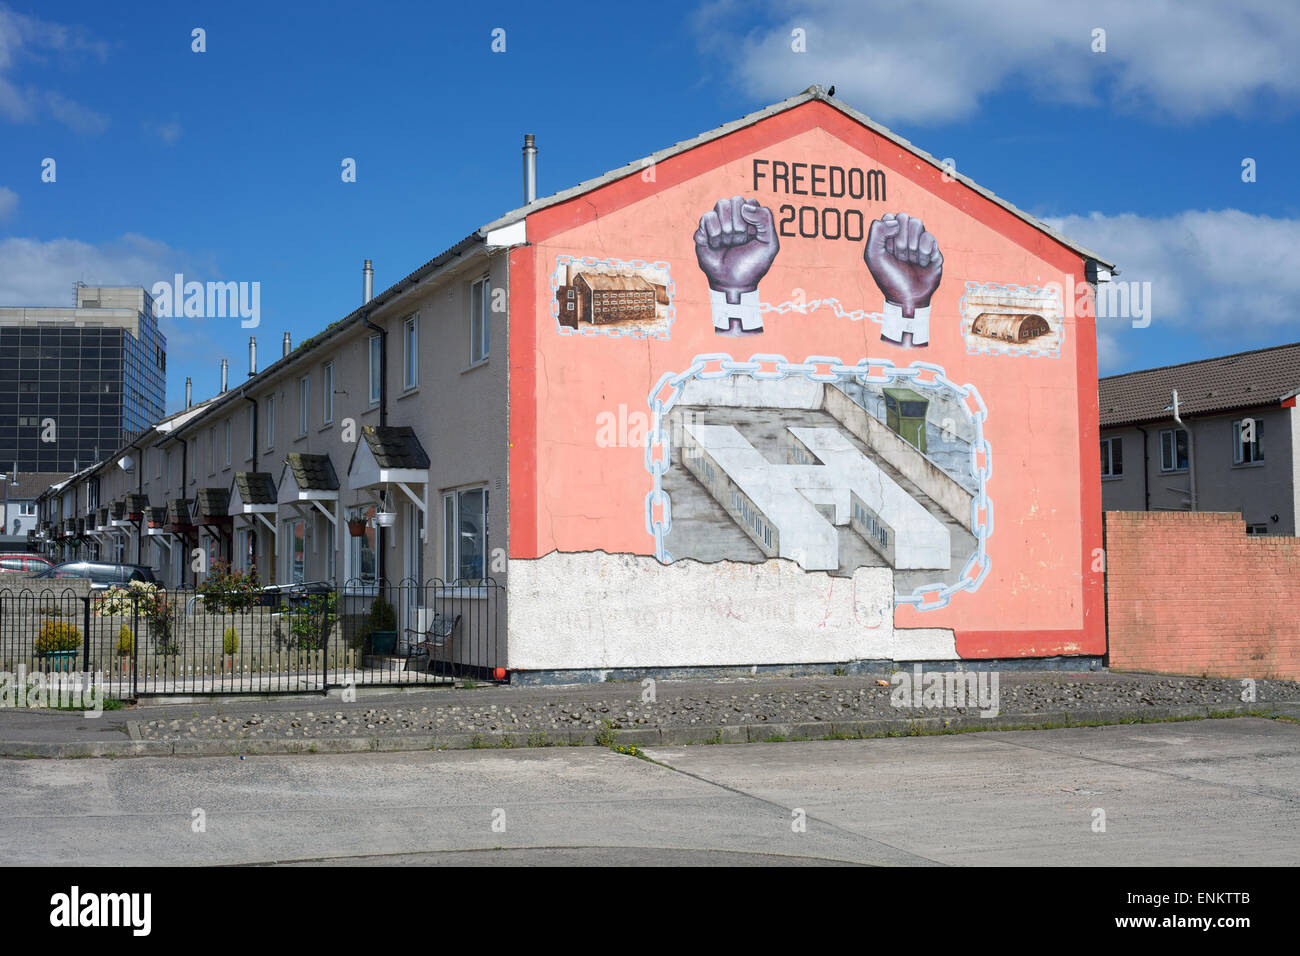 Political mural on a house in Belfast, Northern Ireland Stock Photo